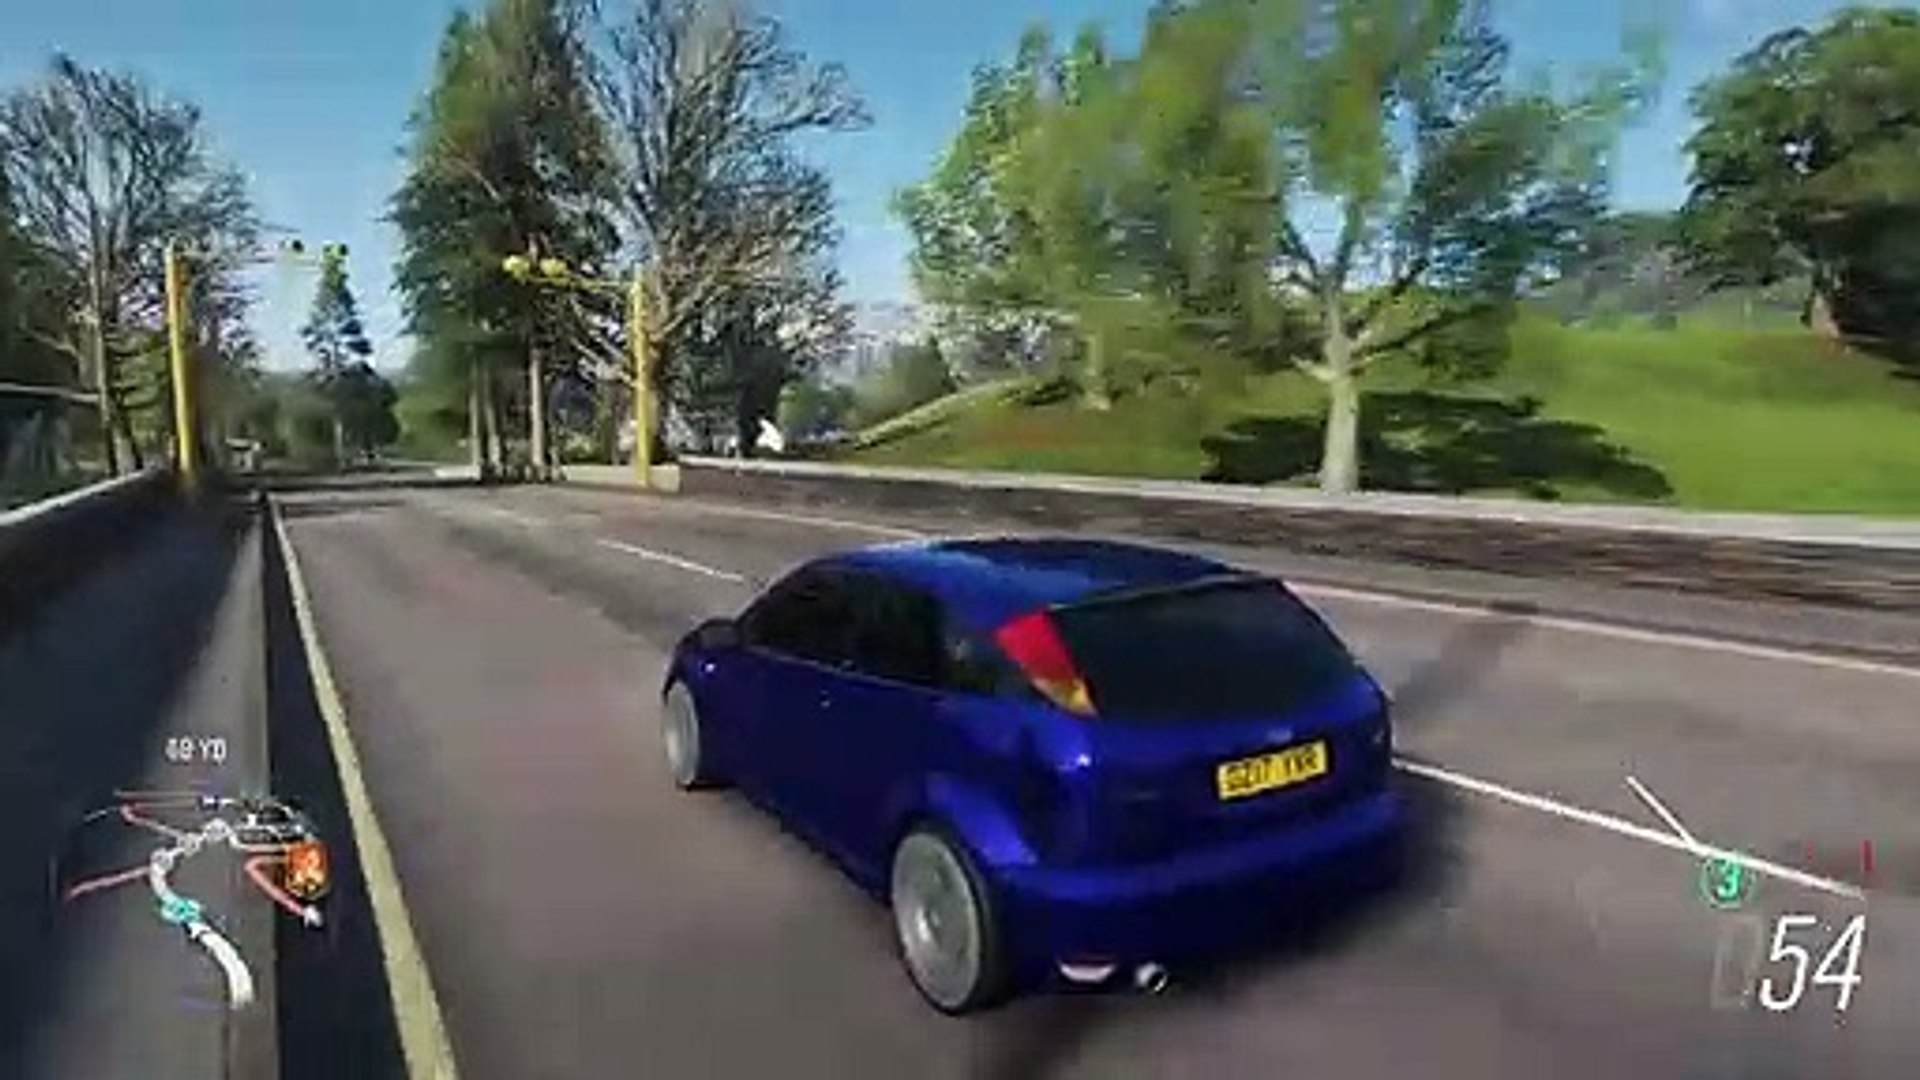 Forza Horizon 4 - 460HP FORD FOCUS RS MK1 - Convoi - 1080p60FPS - video  Dailymotion